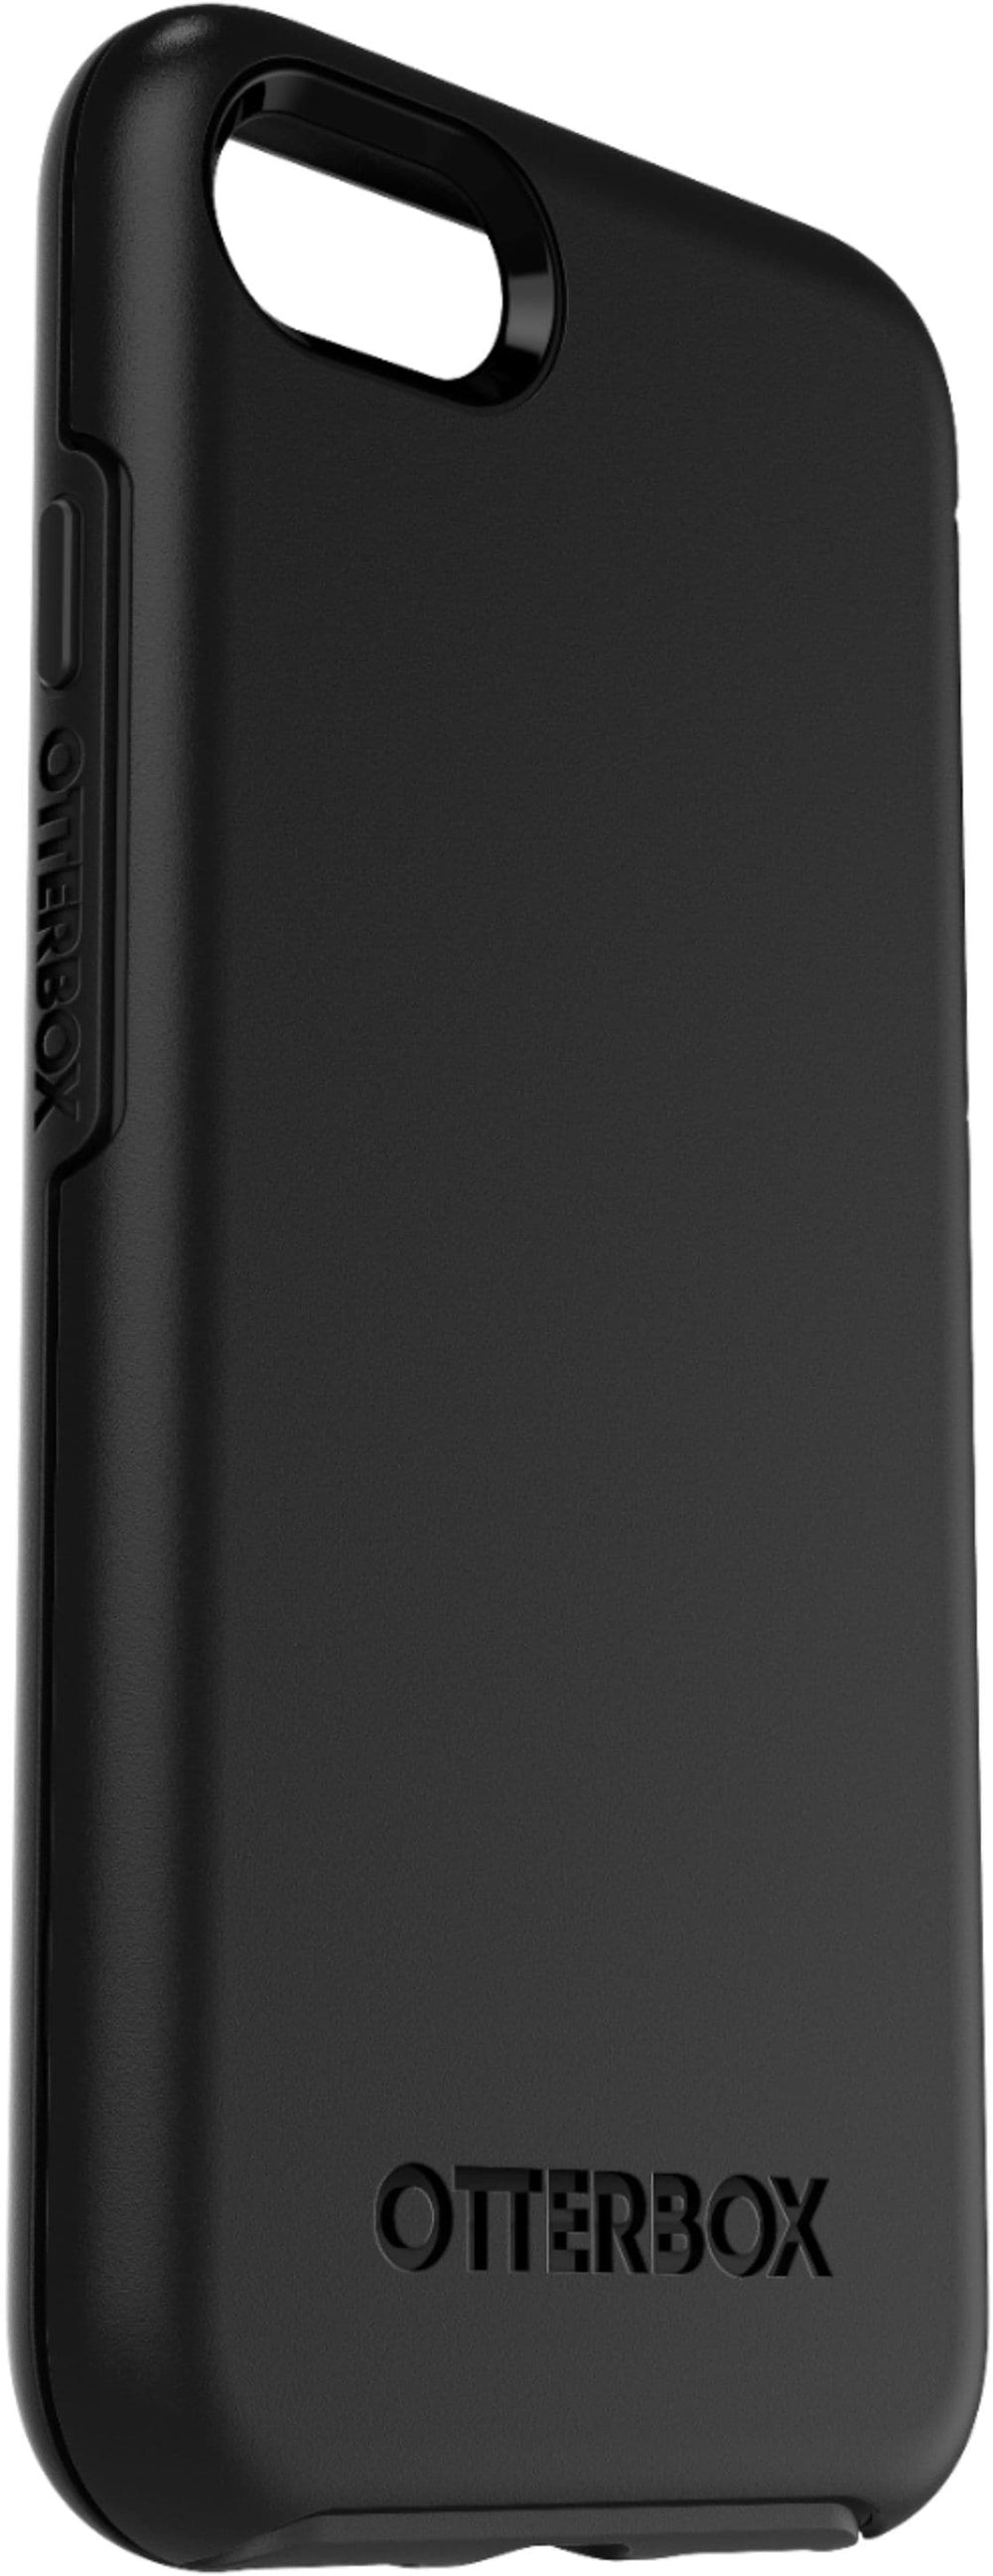 OtterBox - Symmetry Series Hard Shell Case for Apple iPhone 7, 8 and SE (2nd generation) - Black_1